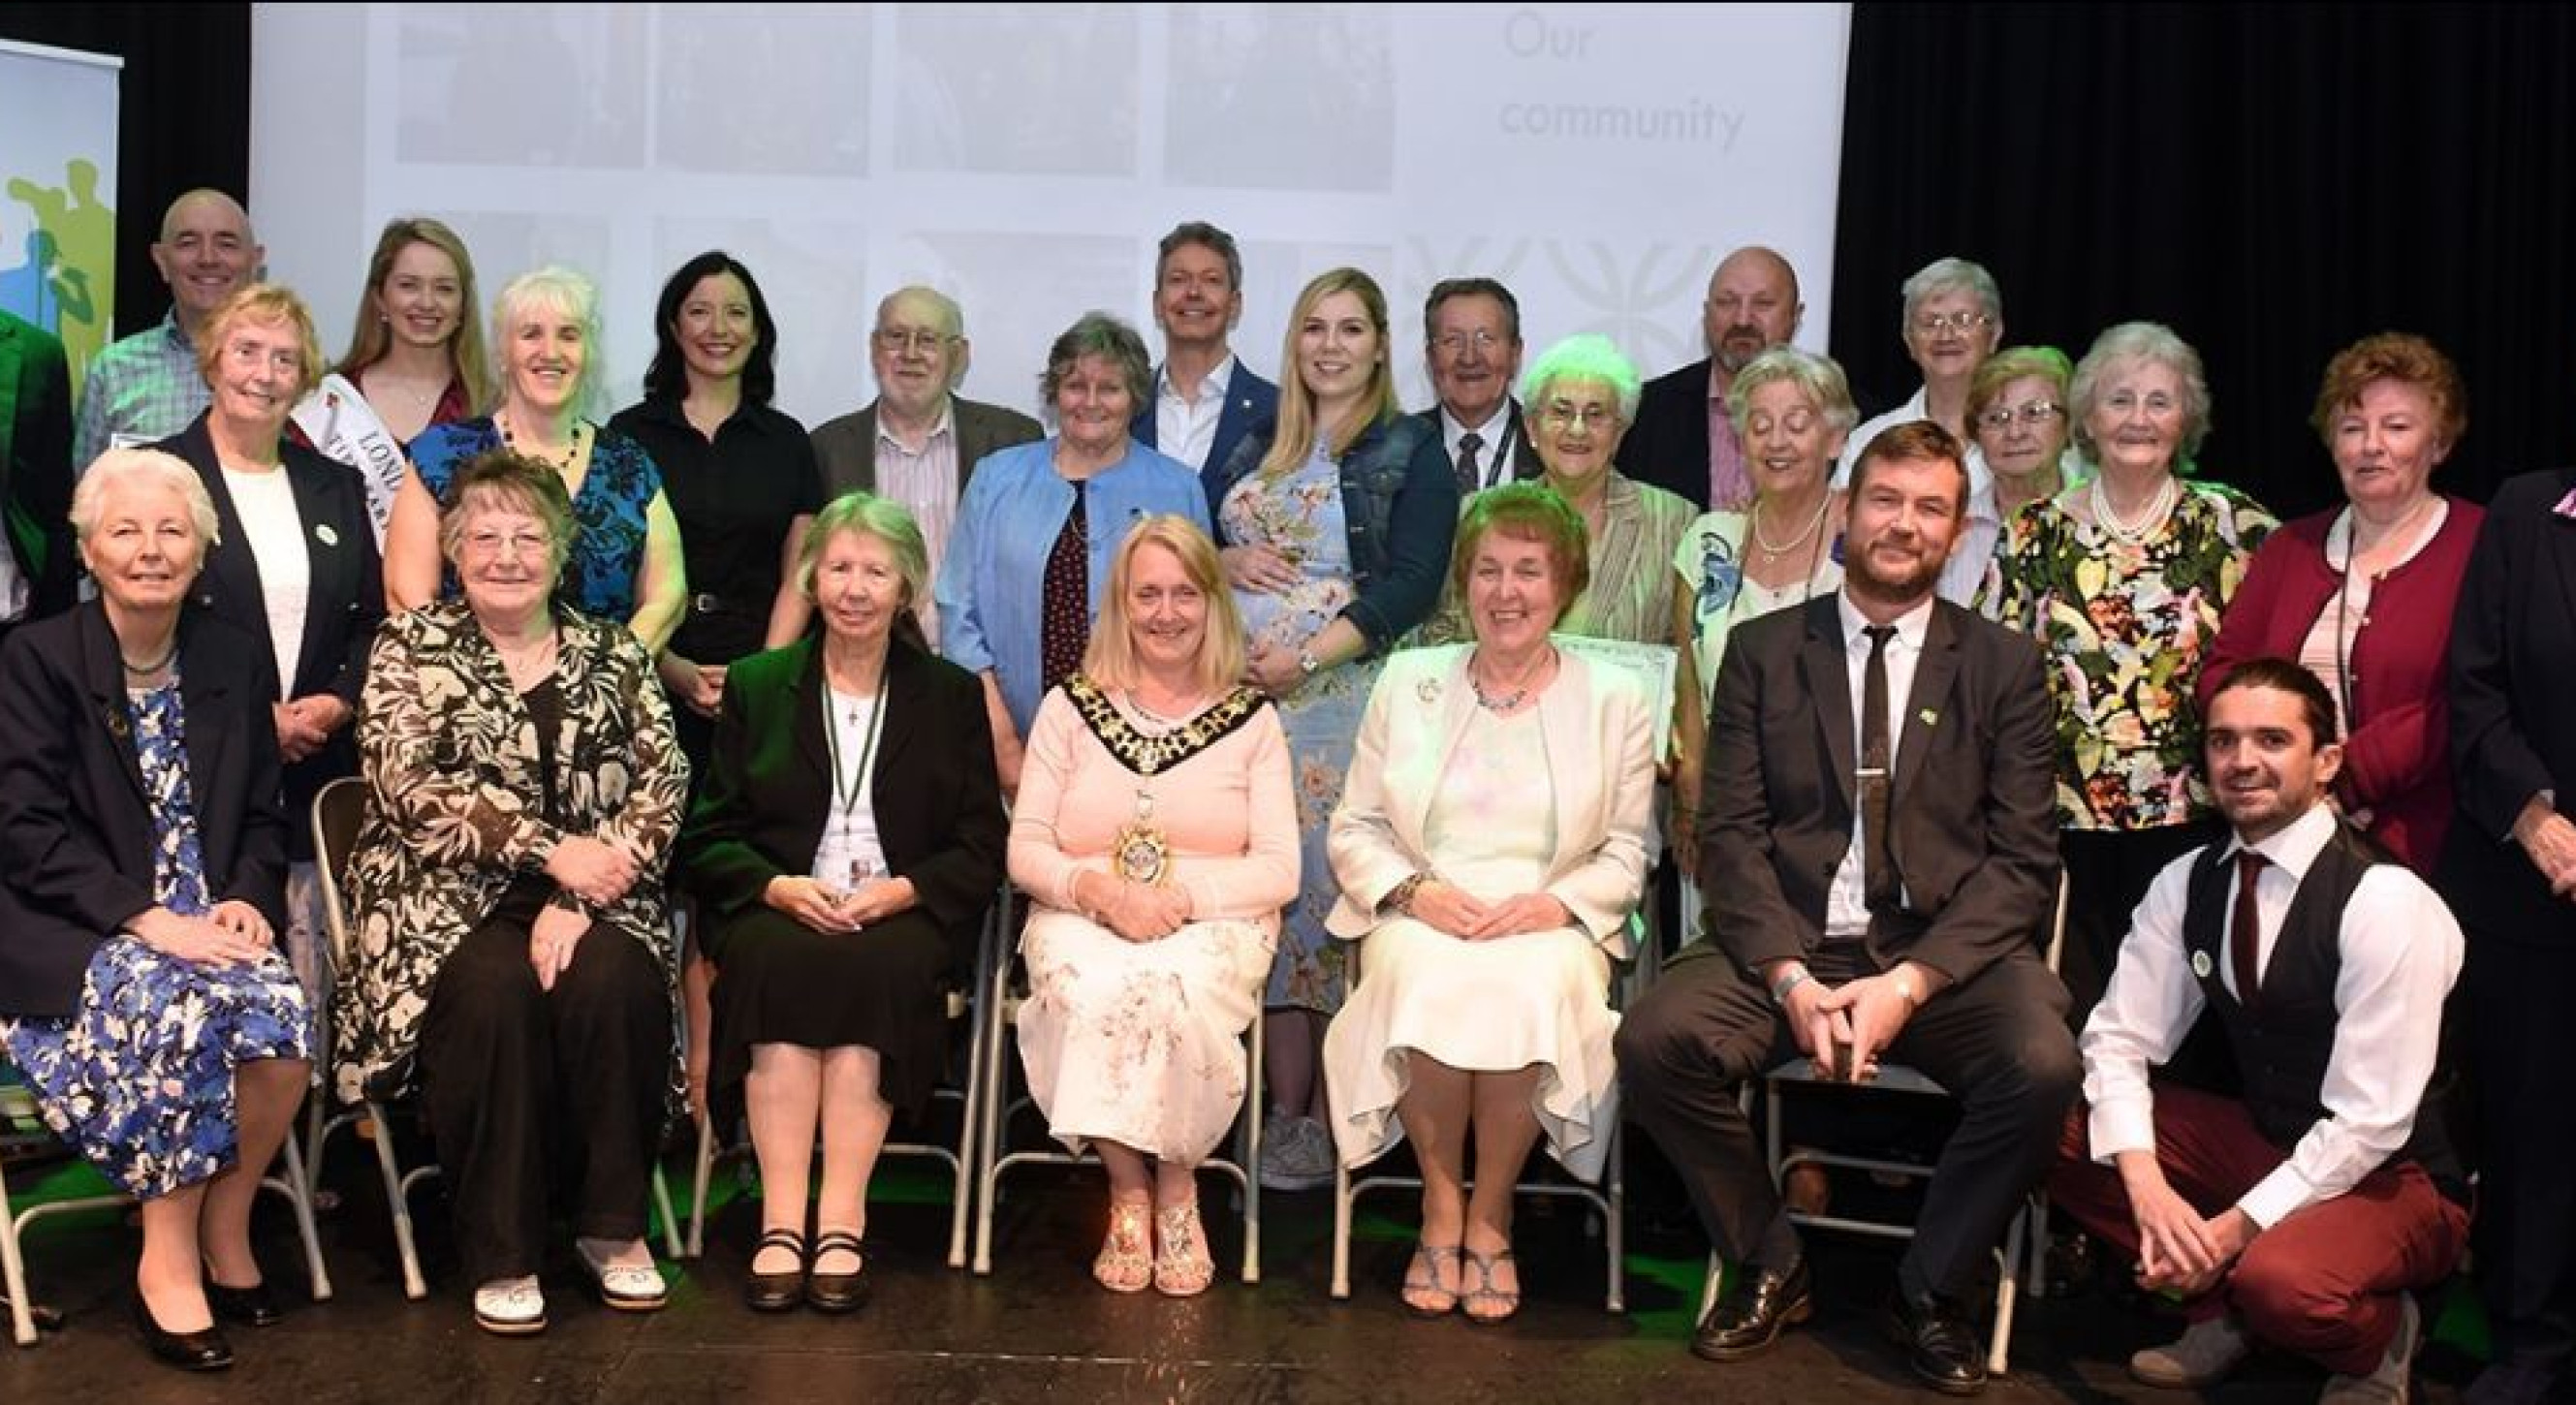 Winners and finalists of the 2019 Awards with sponsors, judges and the Mayor of Hammersmith & Fulham, Daryl Brown, herself a Dubliner.